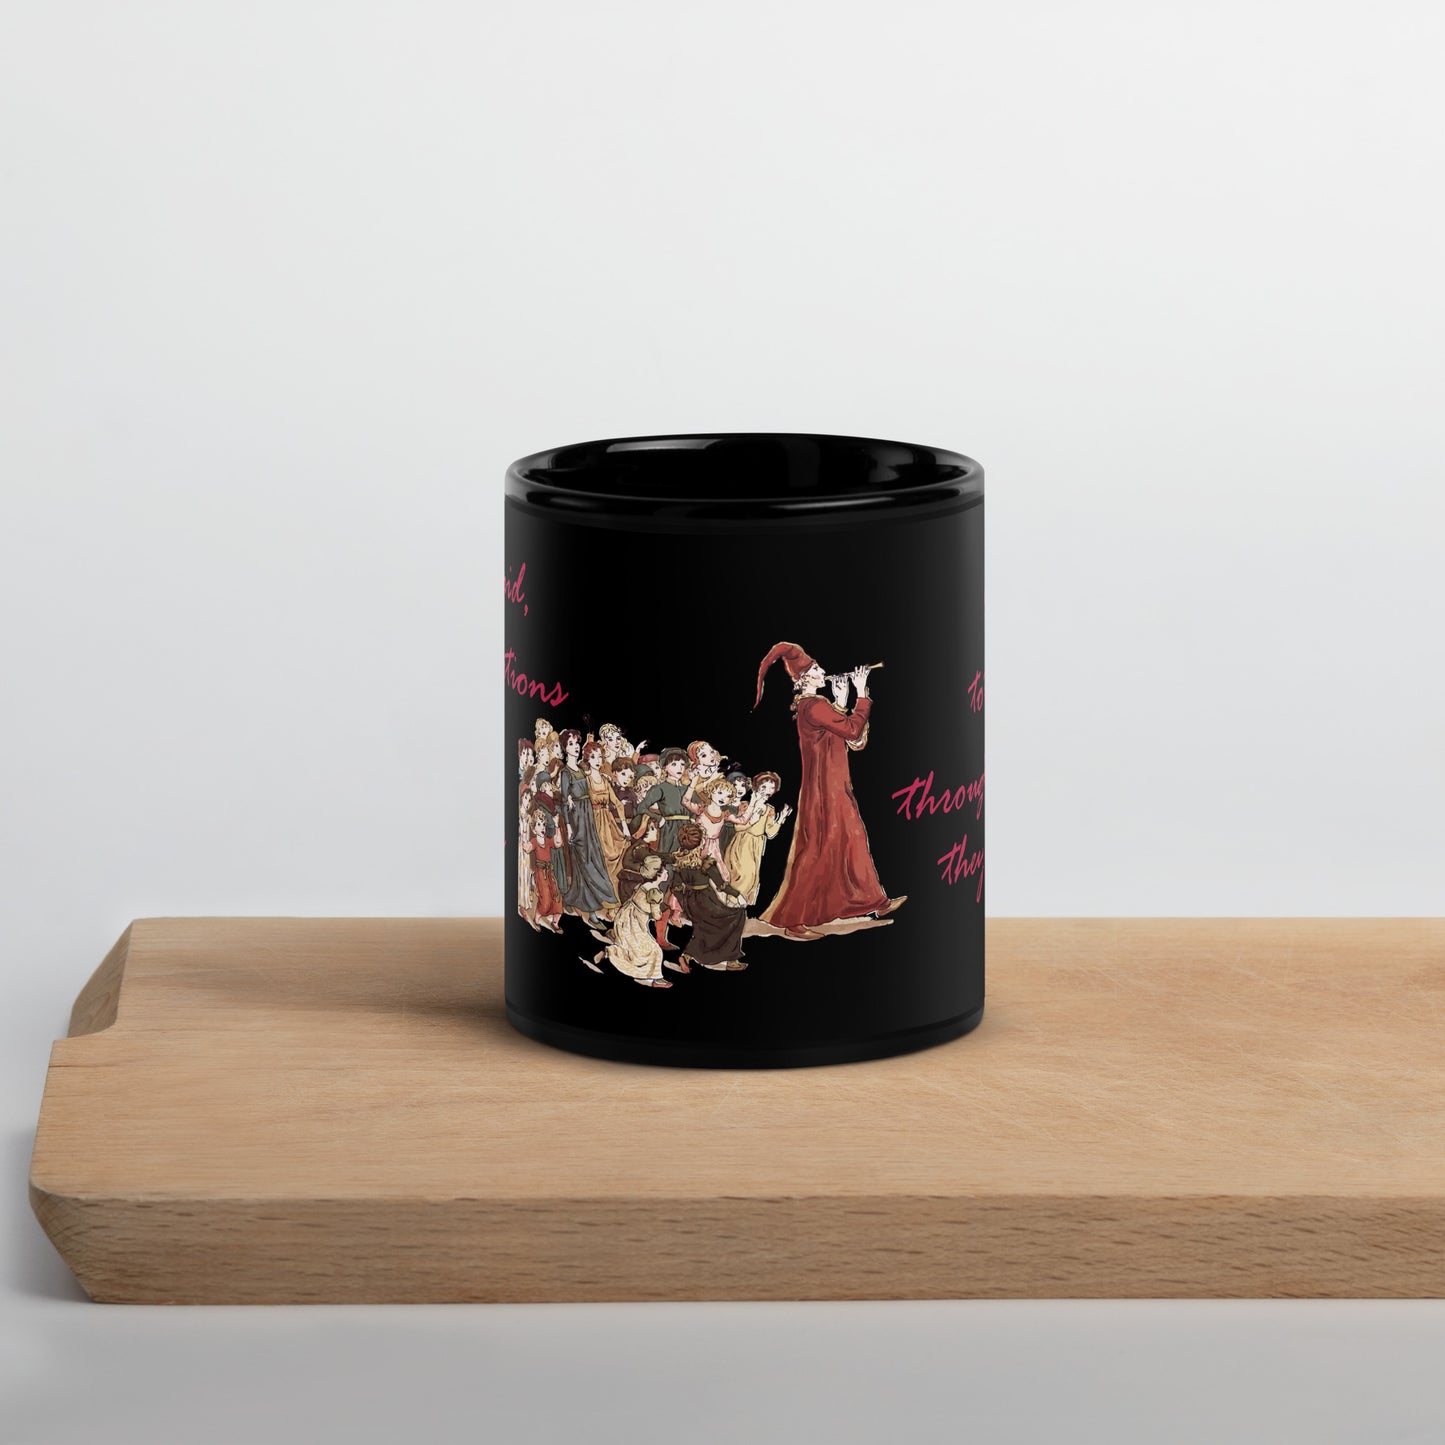 A007 Mug - Black Glossy Ceramic Mug Featuring Luke 17:1 With a Graphic Depiction of the Pied Piper Leading a Mesmerized Crowd.